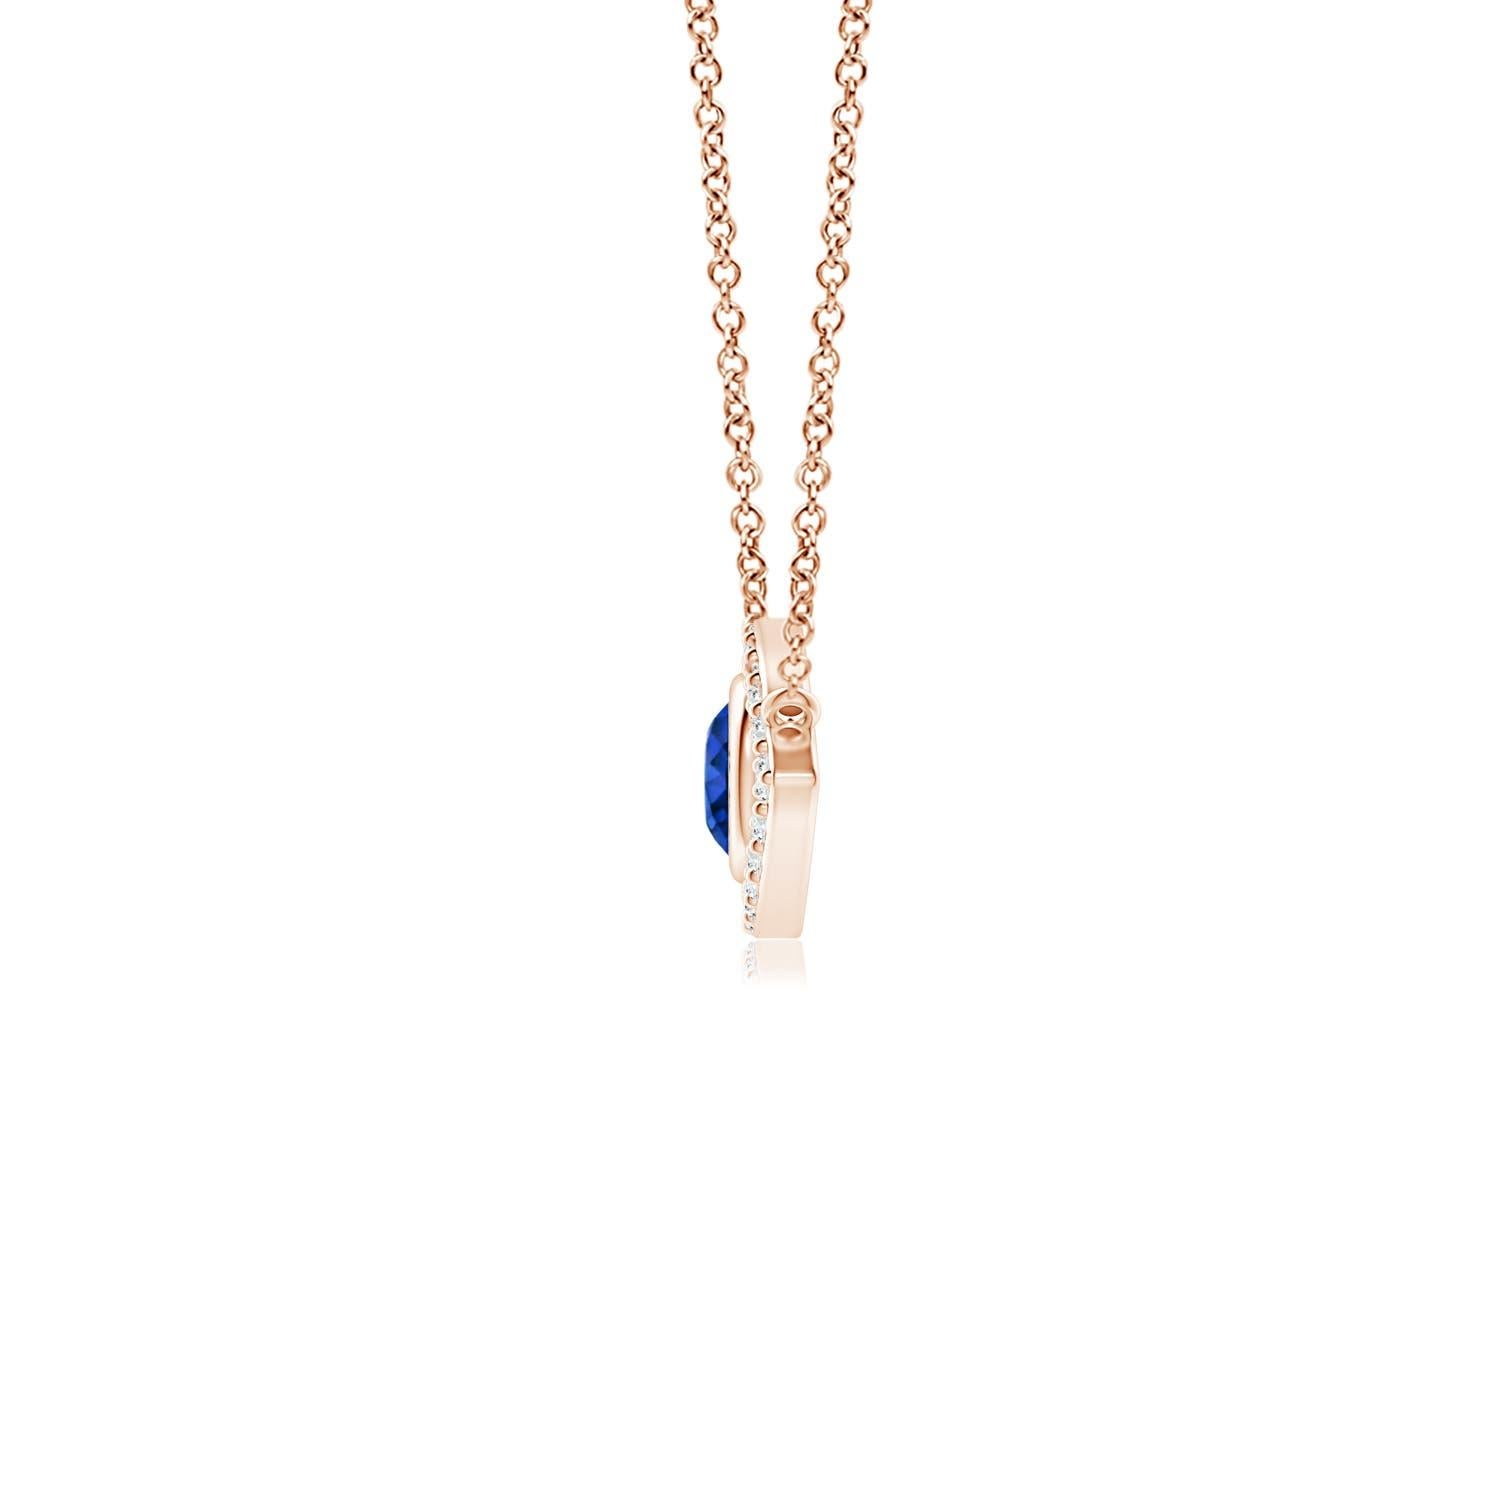 Hanging gracefully from a shiny metal bale is a diamond studded frame with a round sapphire bezel set at the center. The sparkling diamonds create a compelling contrast against the deep blue sapphire. Crafted in 14k rose gold, this sapphire evil eye